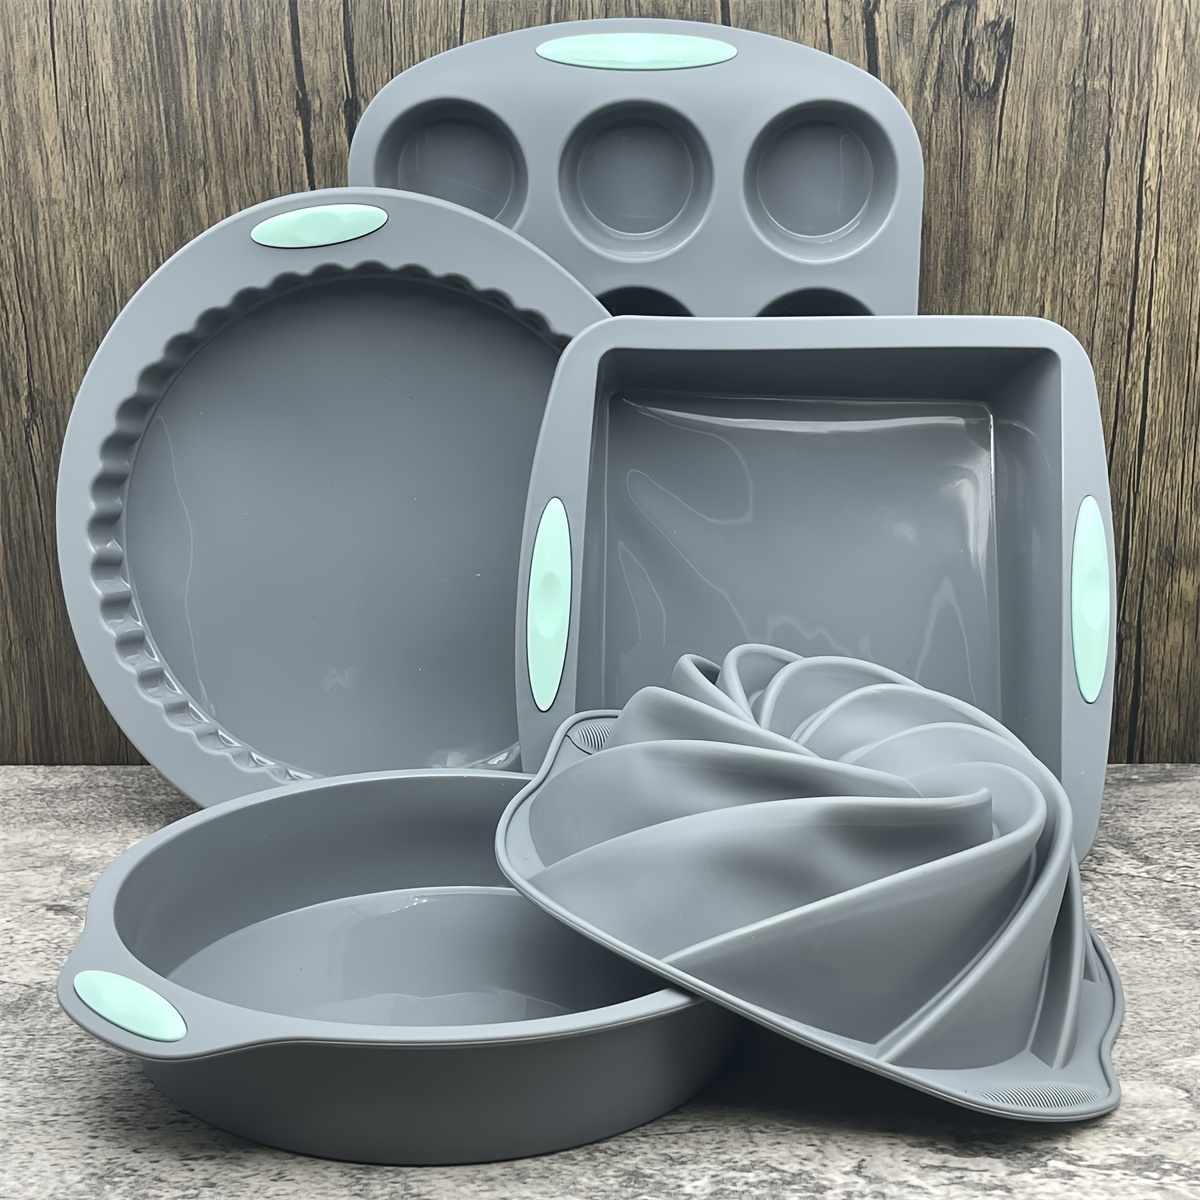 Nonstick Silicone Bakeware Set Silicone Cake Molds Set For Baking,  Including Baking Pans, Cake Molds, Cake Pans, Toast Mold, Muffin Pan, Donut  Pan, Pizza Pan, Bundt Pan, And Silicone Cupcake Molds Set 